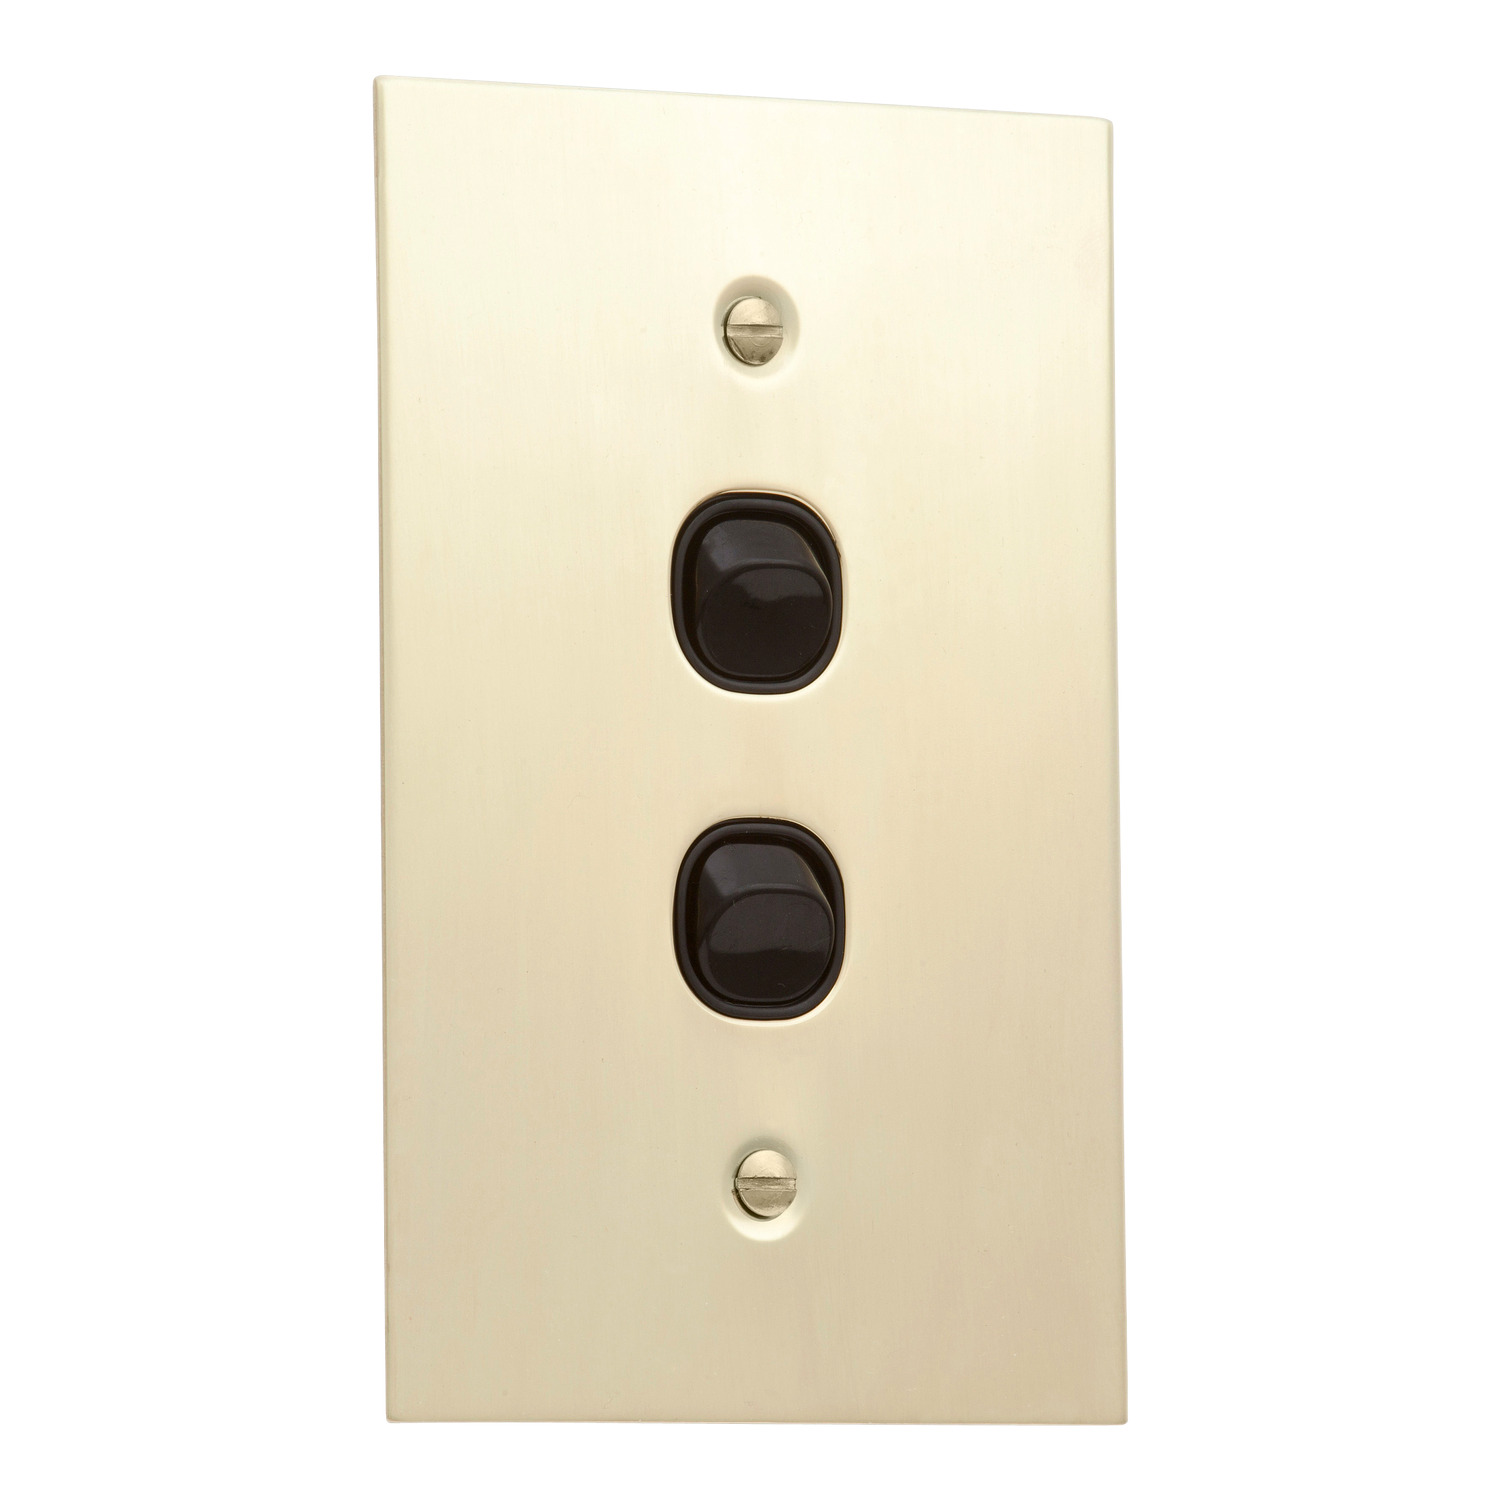 Switches - Metal Plate Range, Standard Size, 2 Gang, 250V, 10A